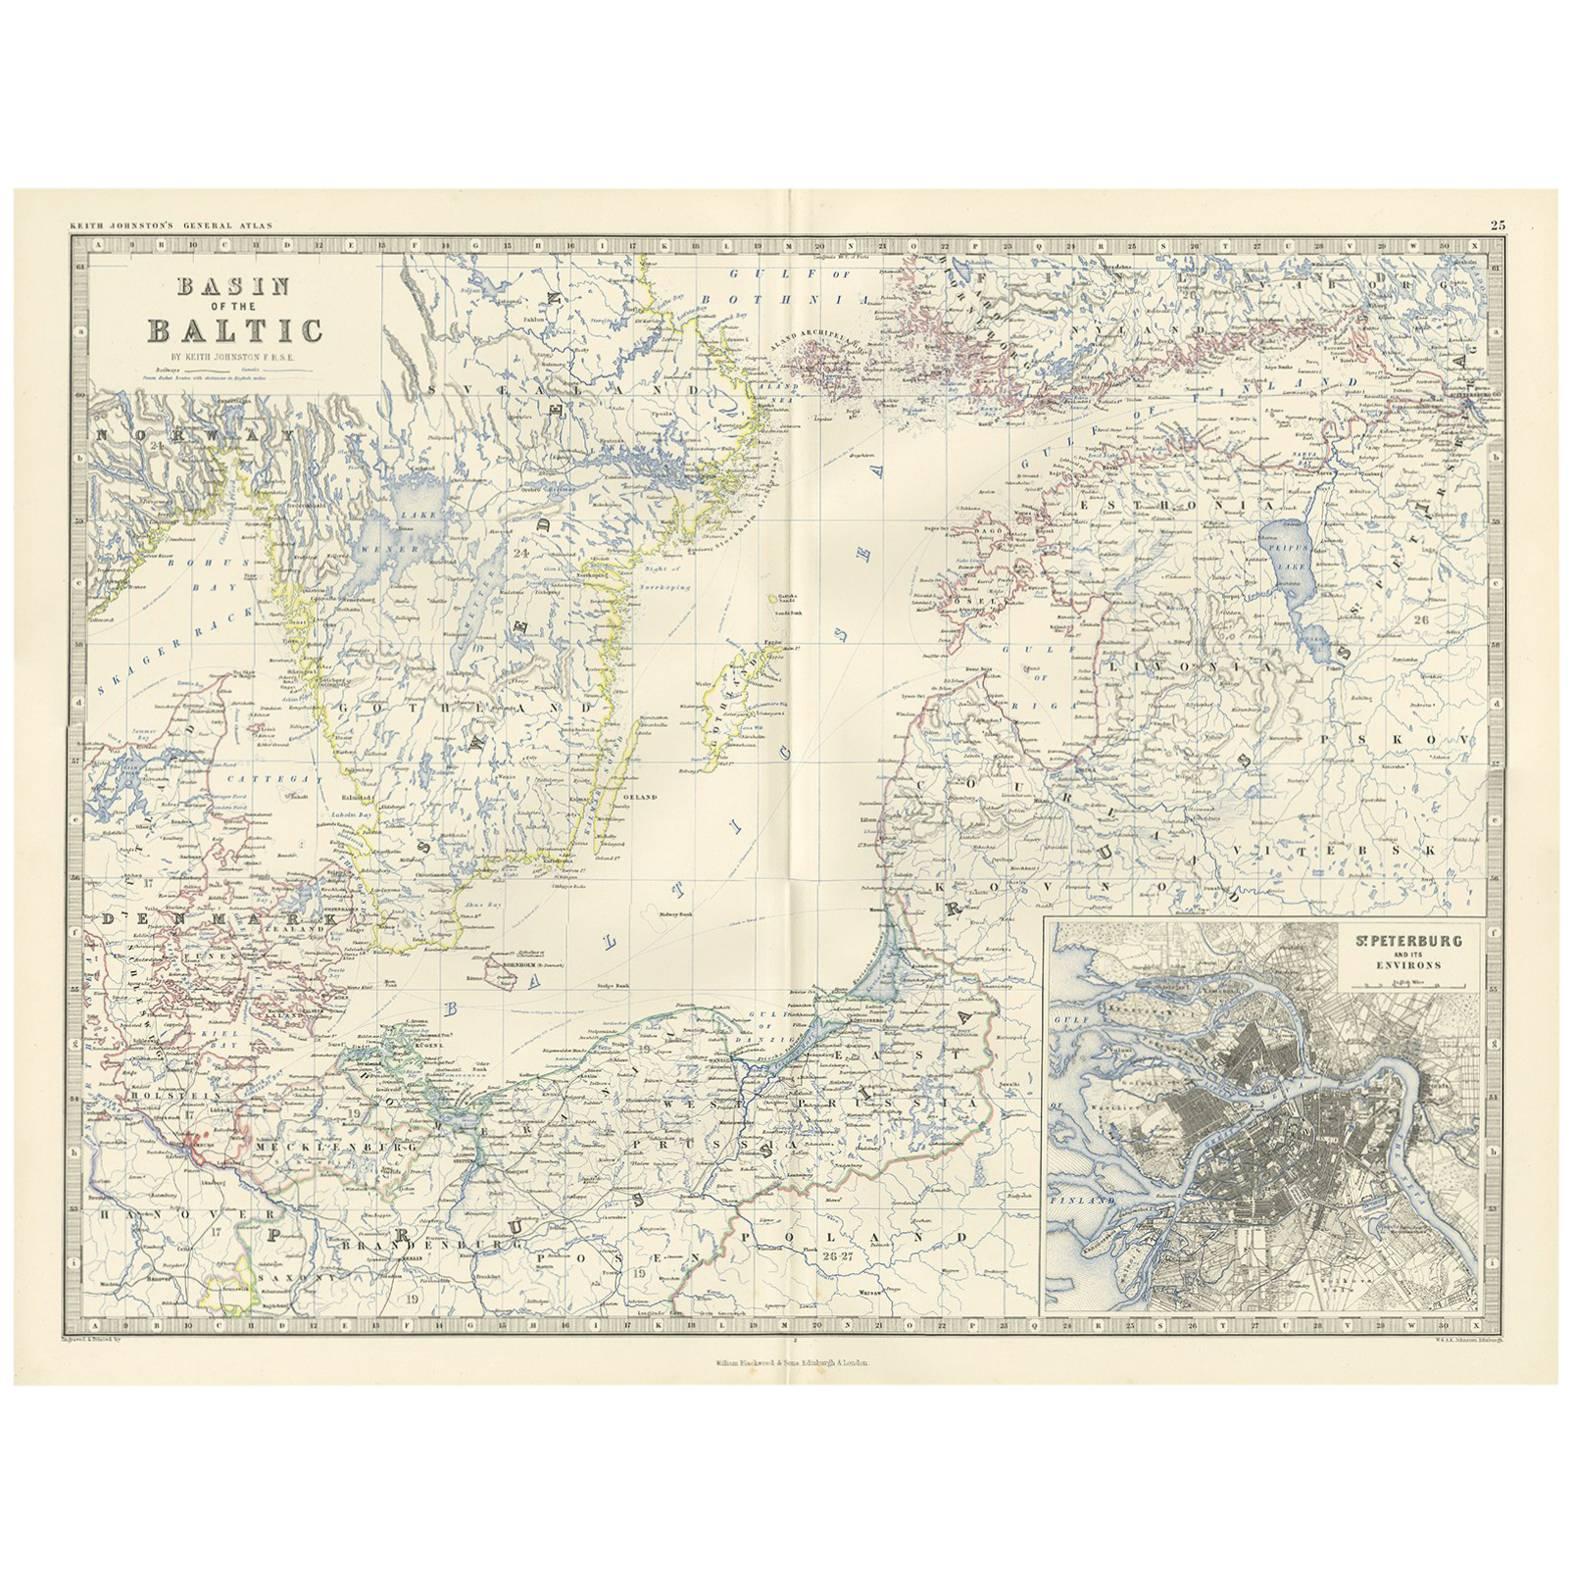 Antique Map of the Surroundings of the Baltic Sea by A.K. Johnston, 1865